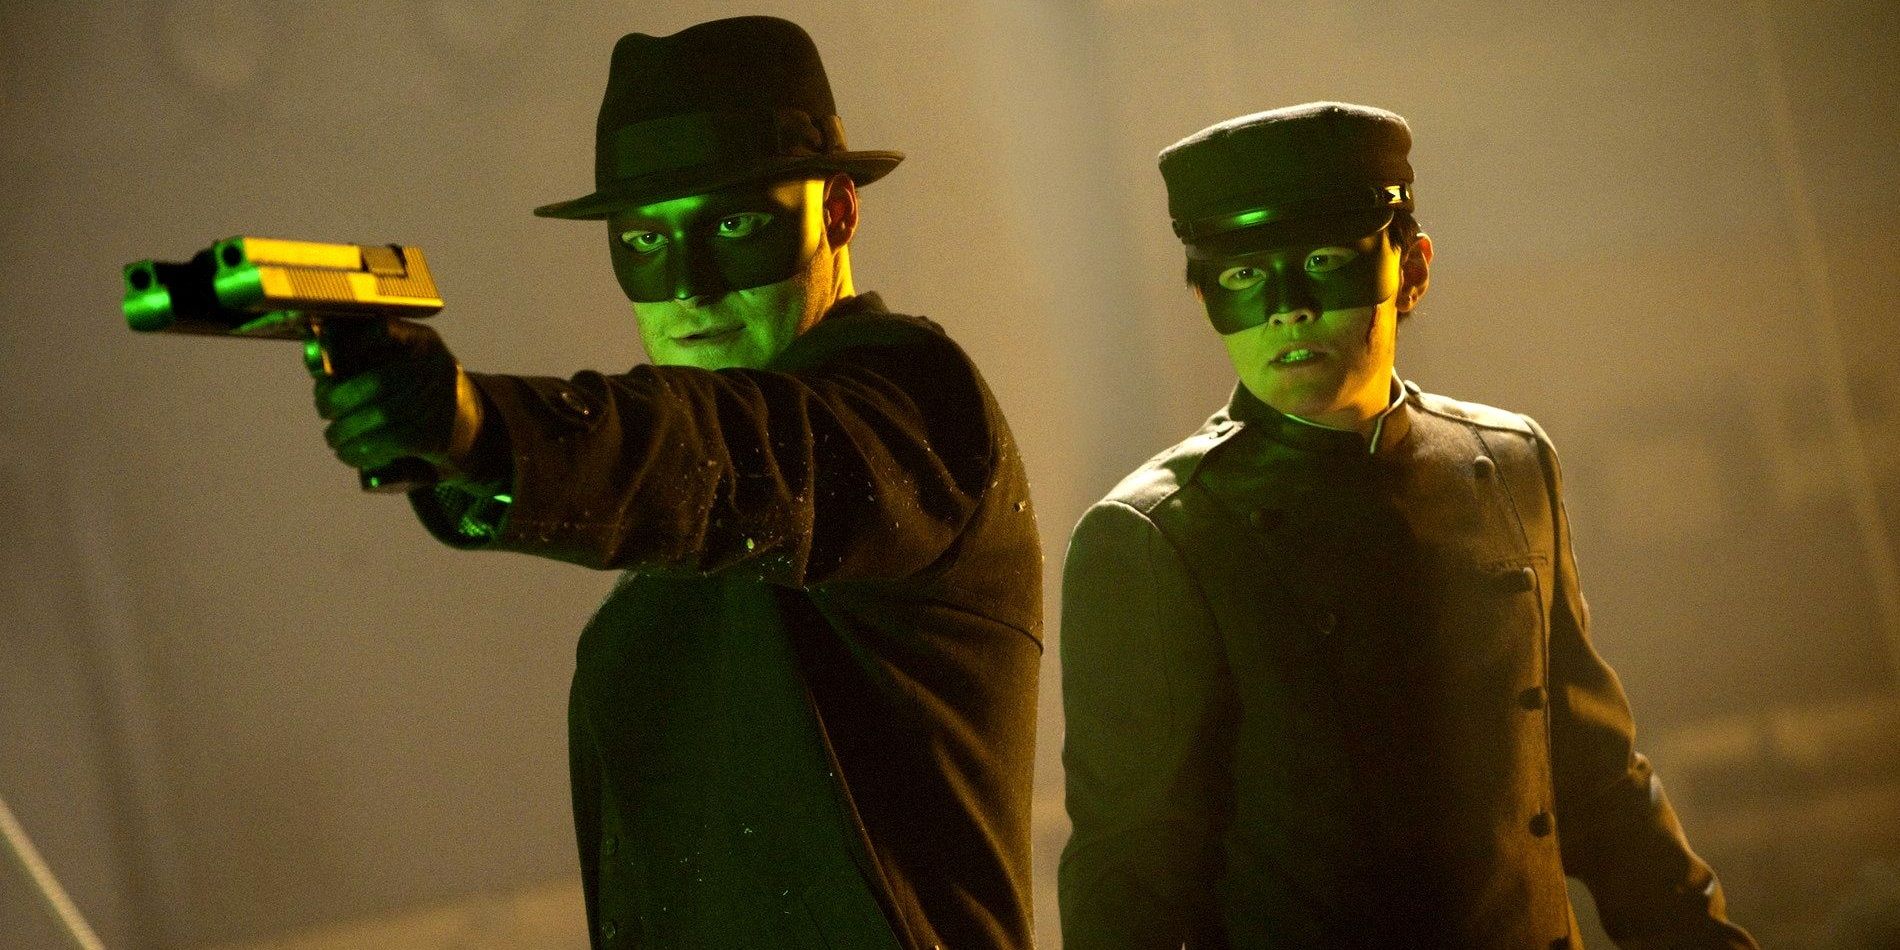 Britt holds a gun with Kato standing next to him in The Green Hornet